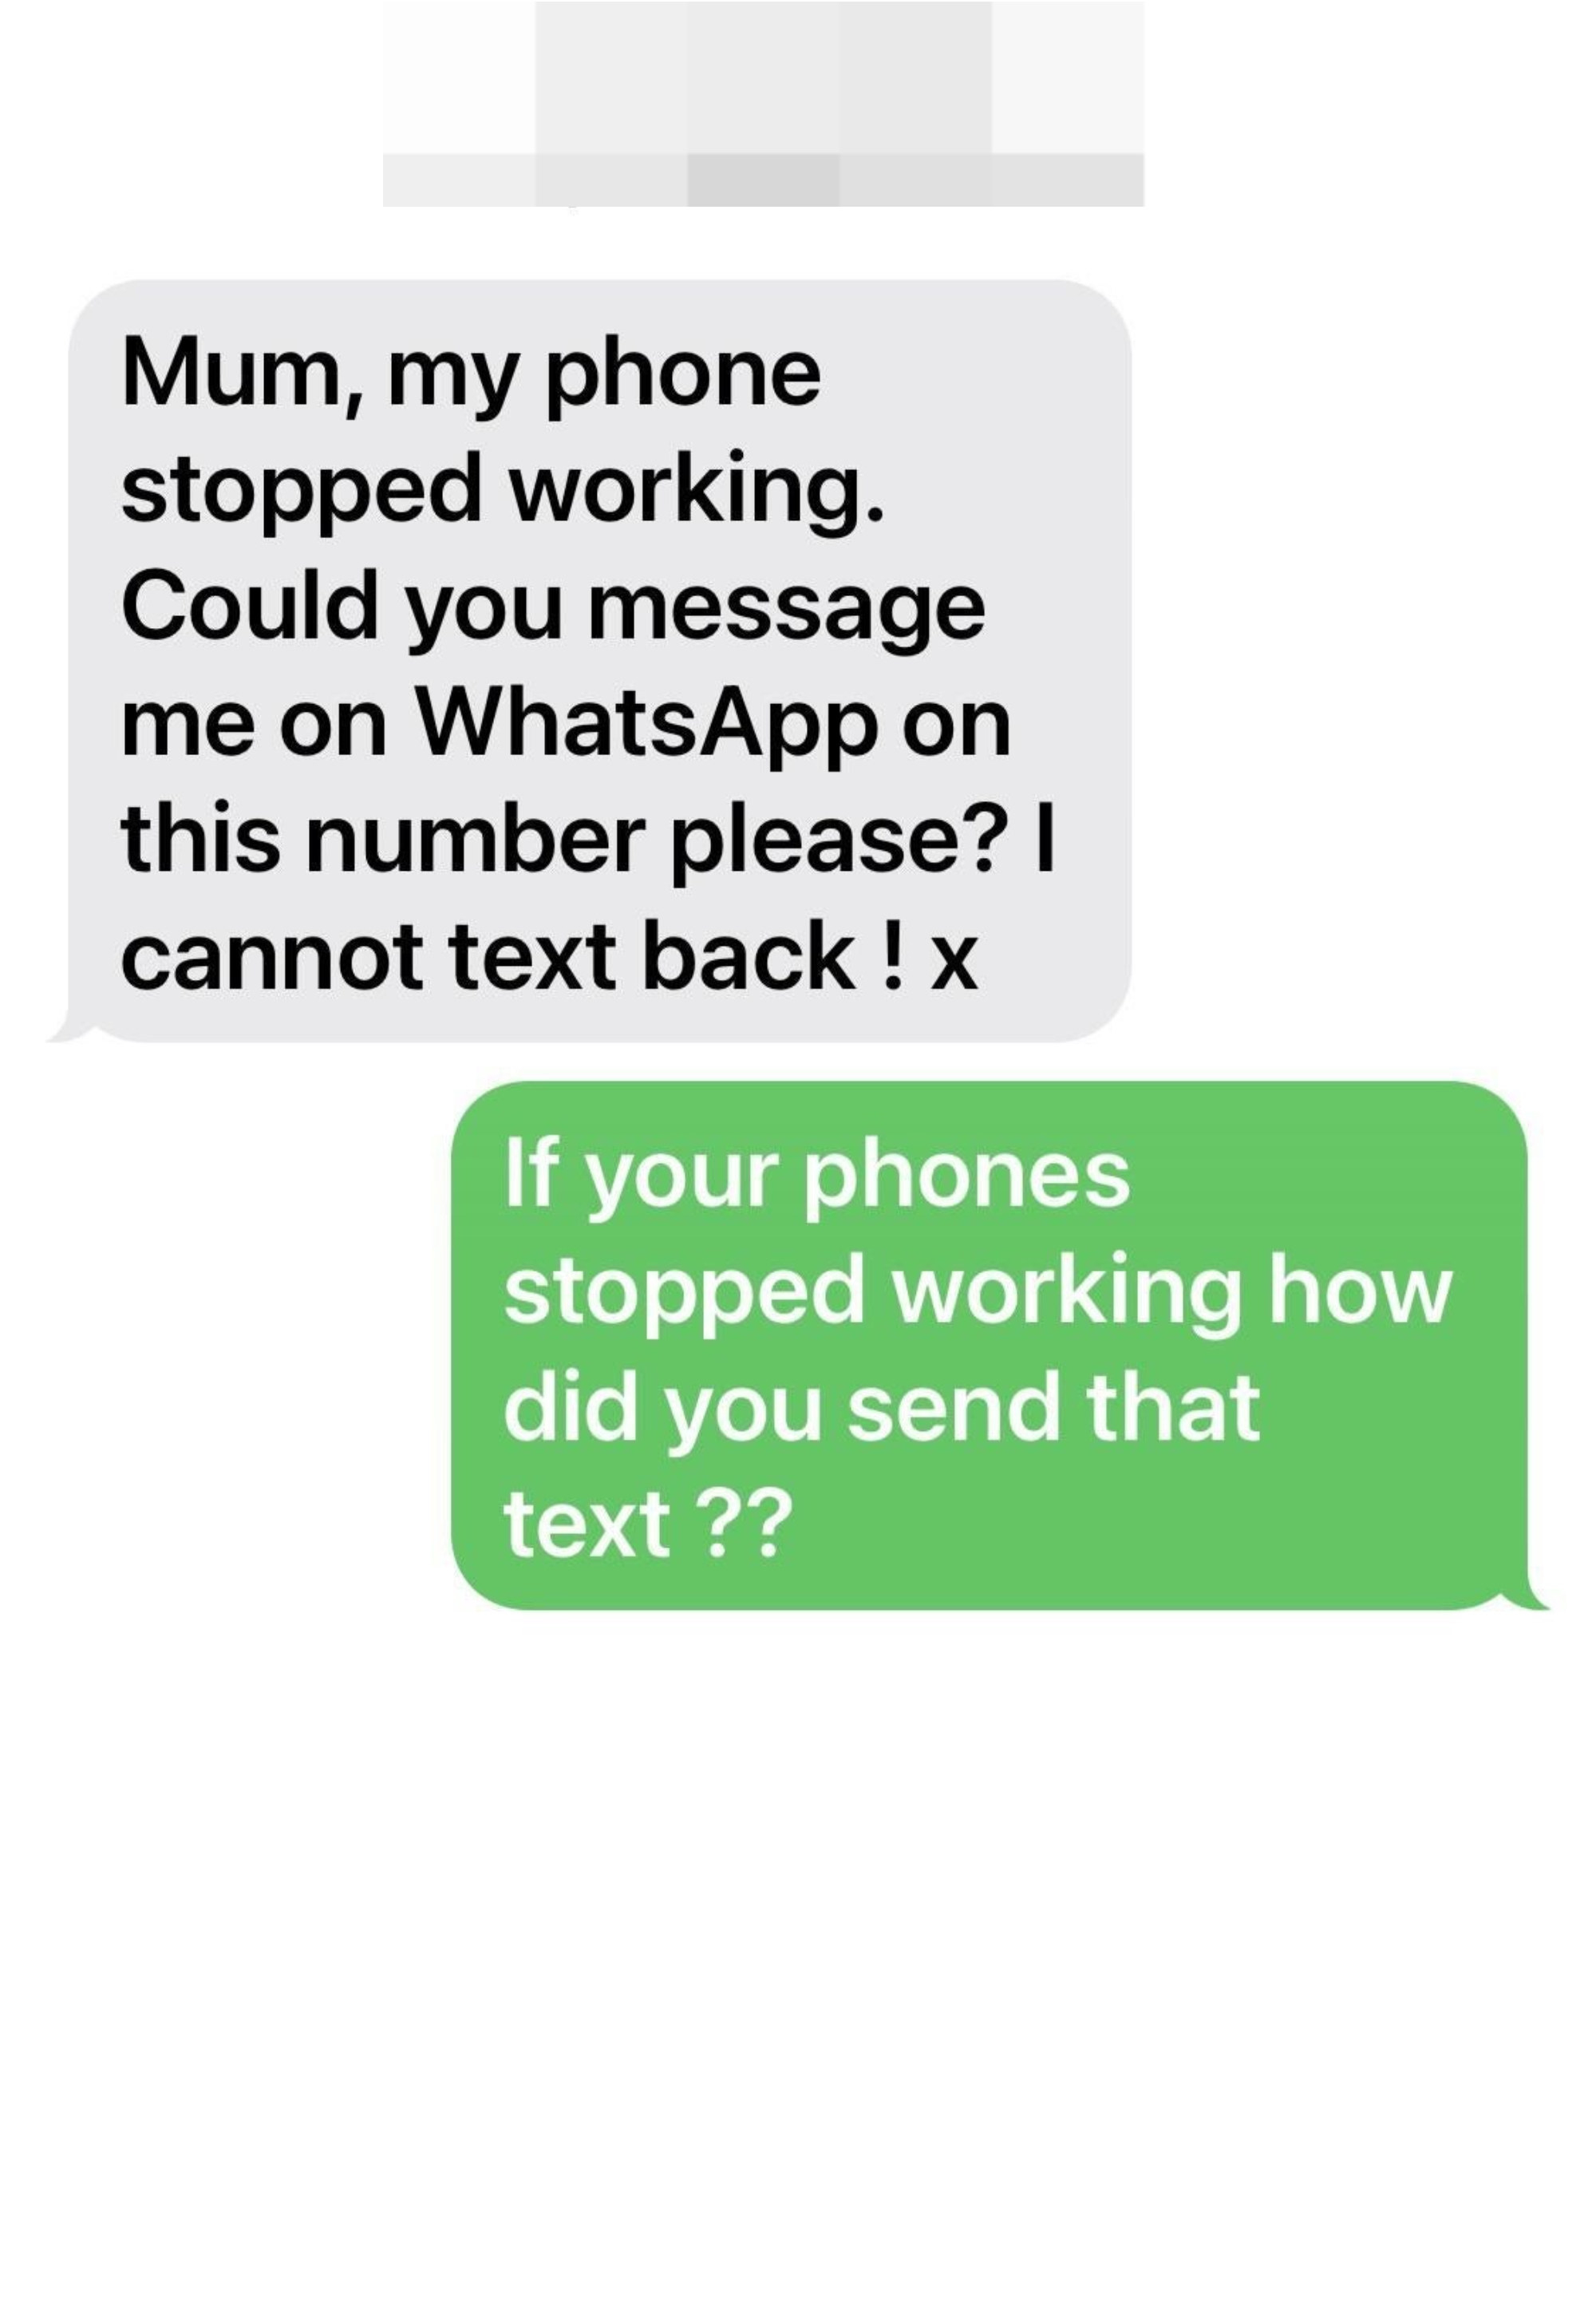 Scammer who sends a text about losing their phone from a phone and gets called out